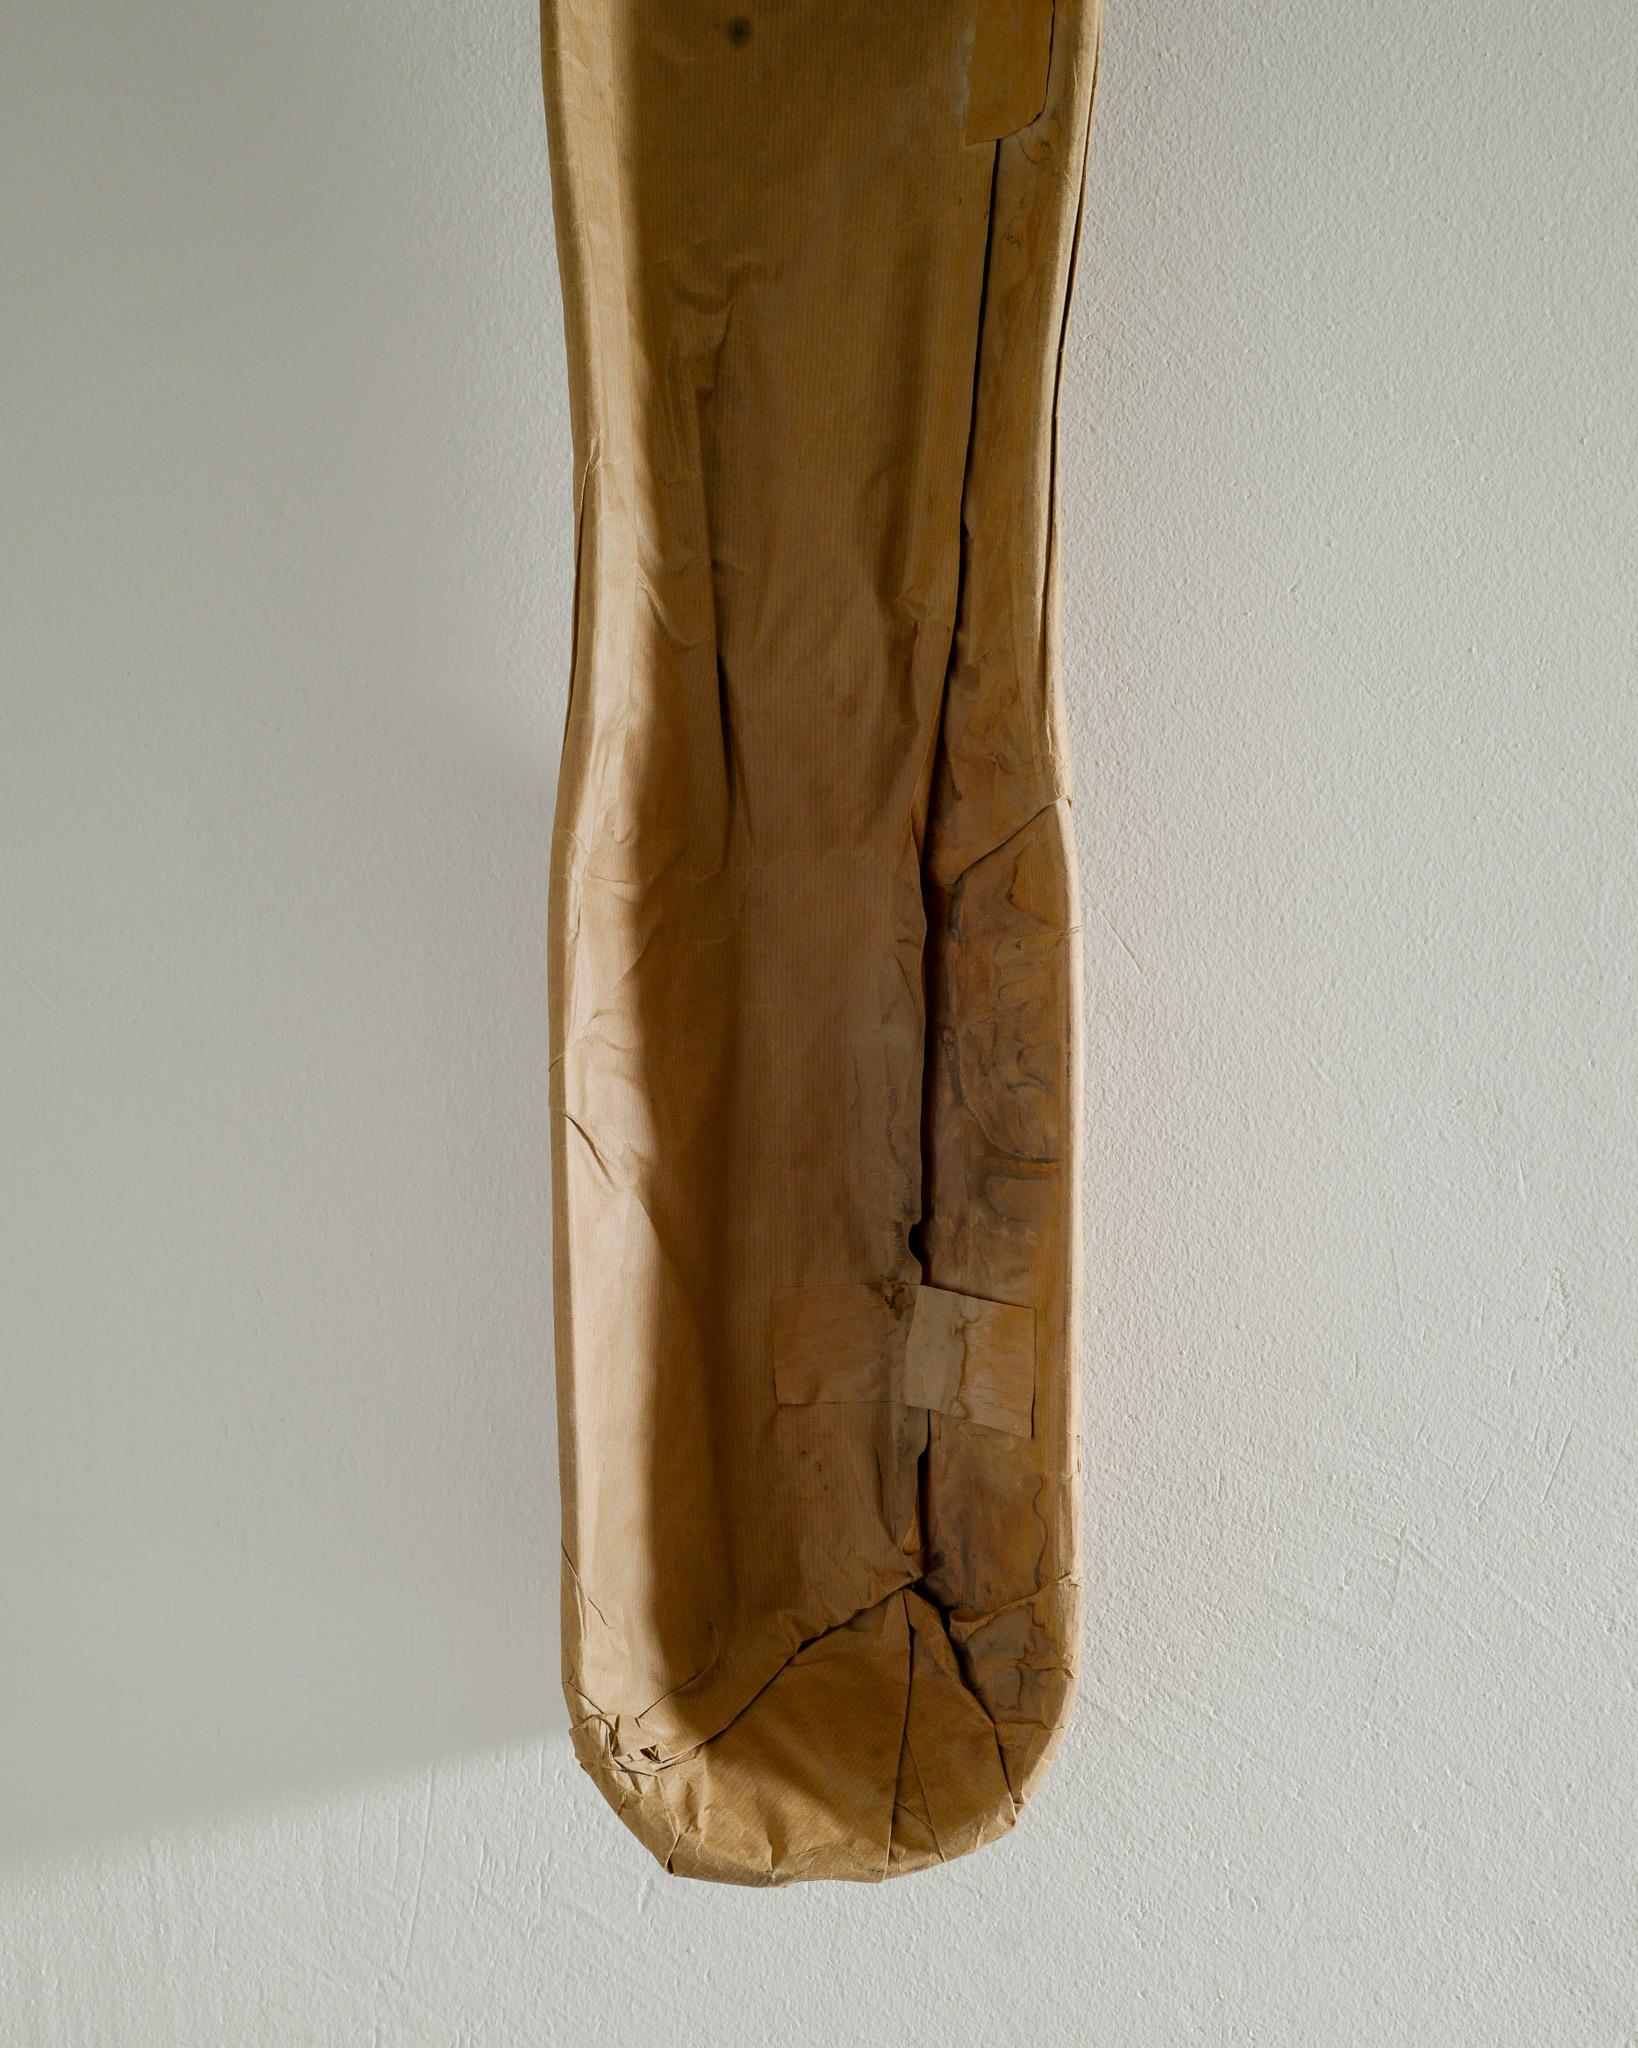 American Original Charles & Ray Eames Mid Century Leg Splint in Molded Plywood, 1943 For Sale